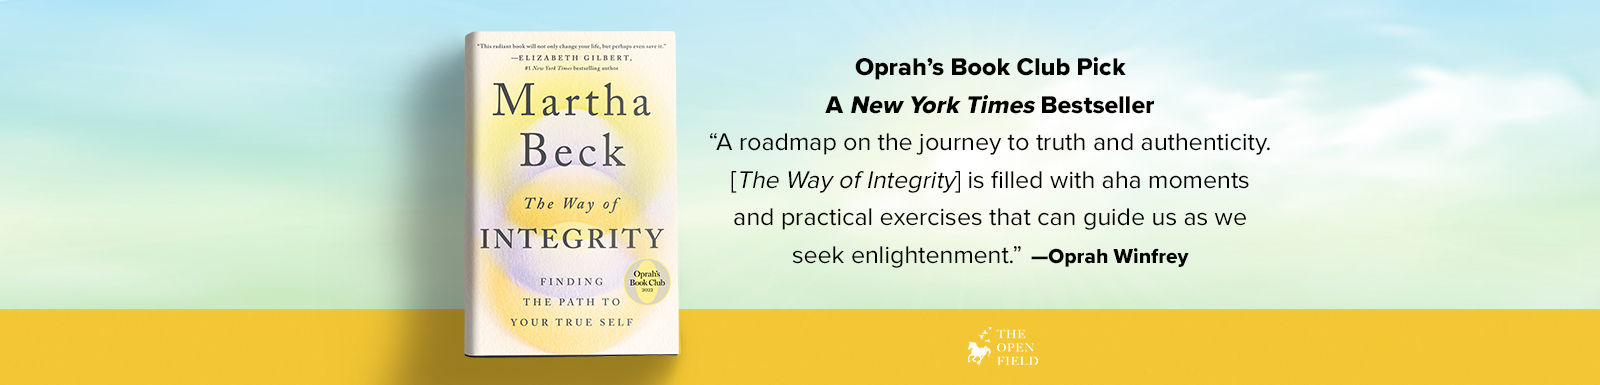 The Way of Integrity: Finding the Path to Your True Self by Martha Beck book cover, Oprah Winfrey Book Club Pick, A New York Times Bestseller, and Oprah Winfrey quote: A roadmap on the journey to truth and authenticity. The Way of Integrity is filled with aha moments and practical exercises that can guide us as we seek enlightenment.